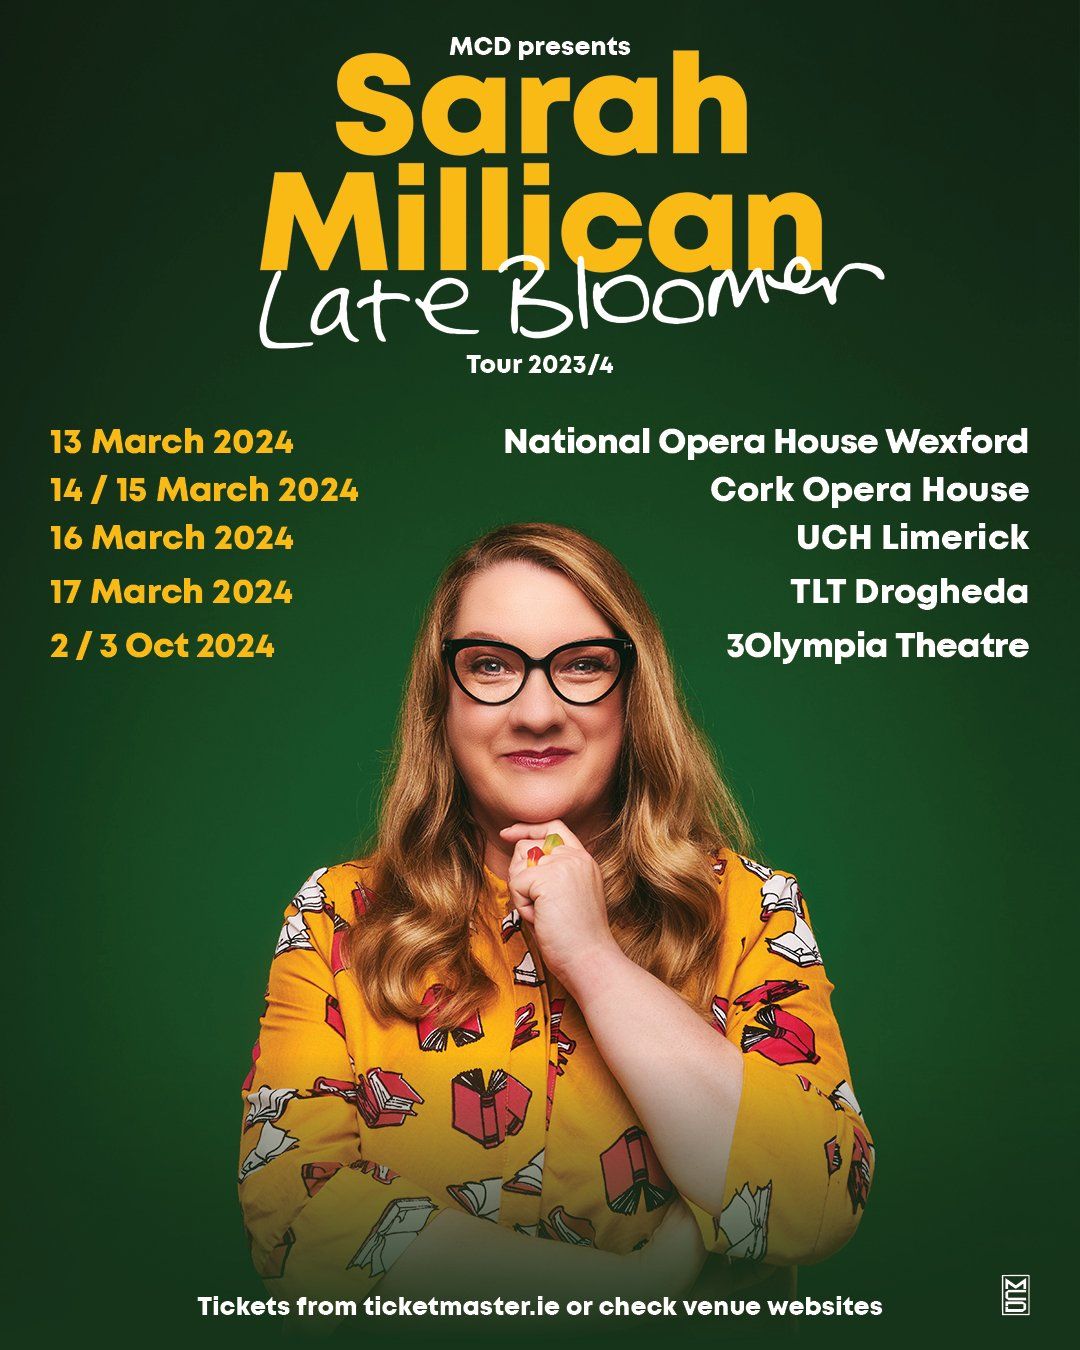 SARAH MILLICAN: LATE BLOOMER  2024 Irish Tour Confirmed  Sarah Millican brings her brand new stand-up show Late Bloomer on tour across Ireland in 2024 calling at National Opera House, Wexford on 13 March; Cork Opera House 14 and 15 March; UCH Limerick 16 March; TLT Drogheda 17 March; and 3Olympia Theatre, Dublin on 2 and 3 October 2024